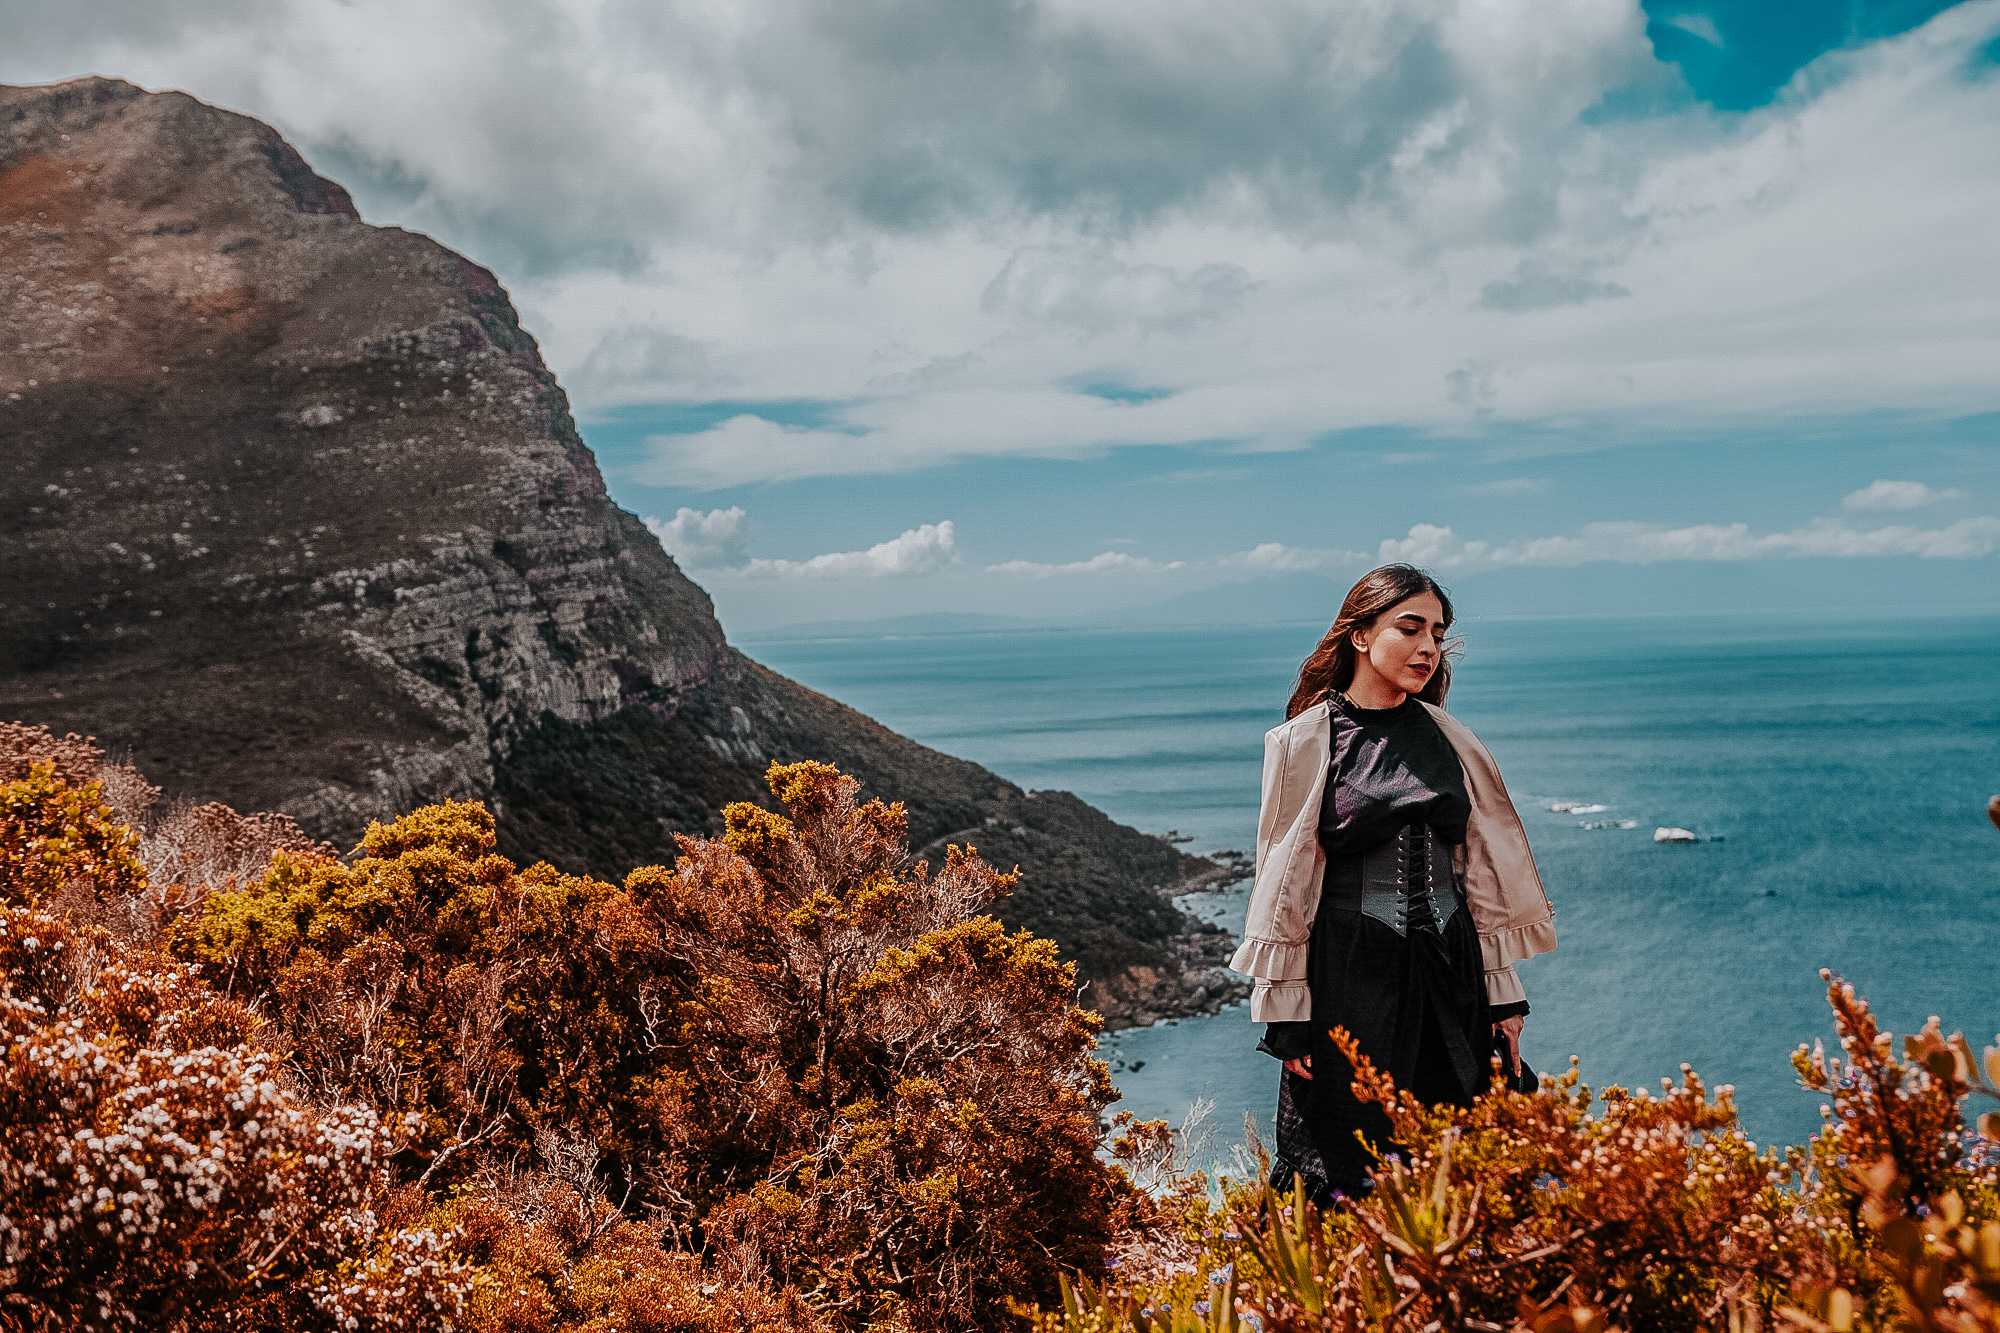 cape town neha menghwani , stylessential, stylessential blog, travel diaries, trave lbog, south africa tourism, travel, cape point, cliff, sea, scenery, what to do in cape town, tourism, travel blogger, fashion blogger, indian travel blog, vero moda, my glamm, mastercard, vacation, goals,